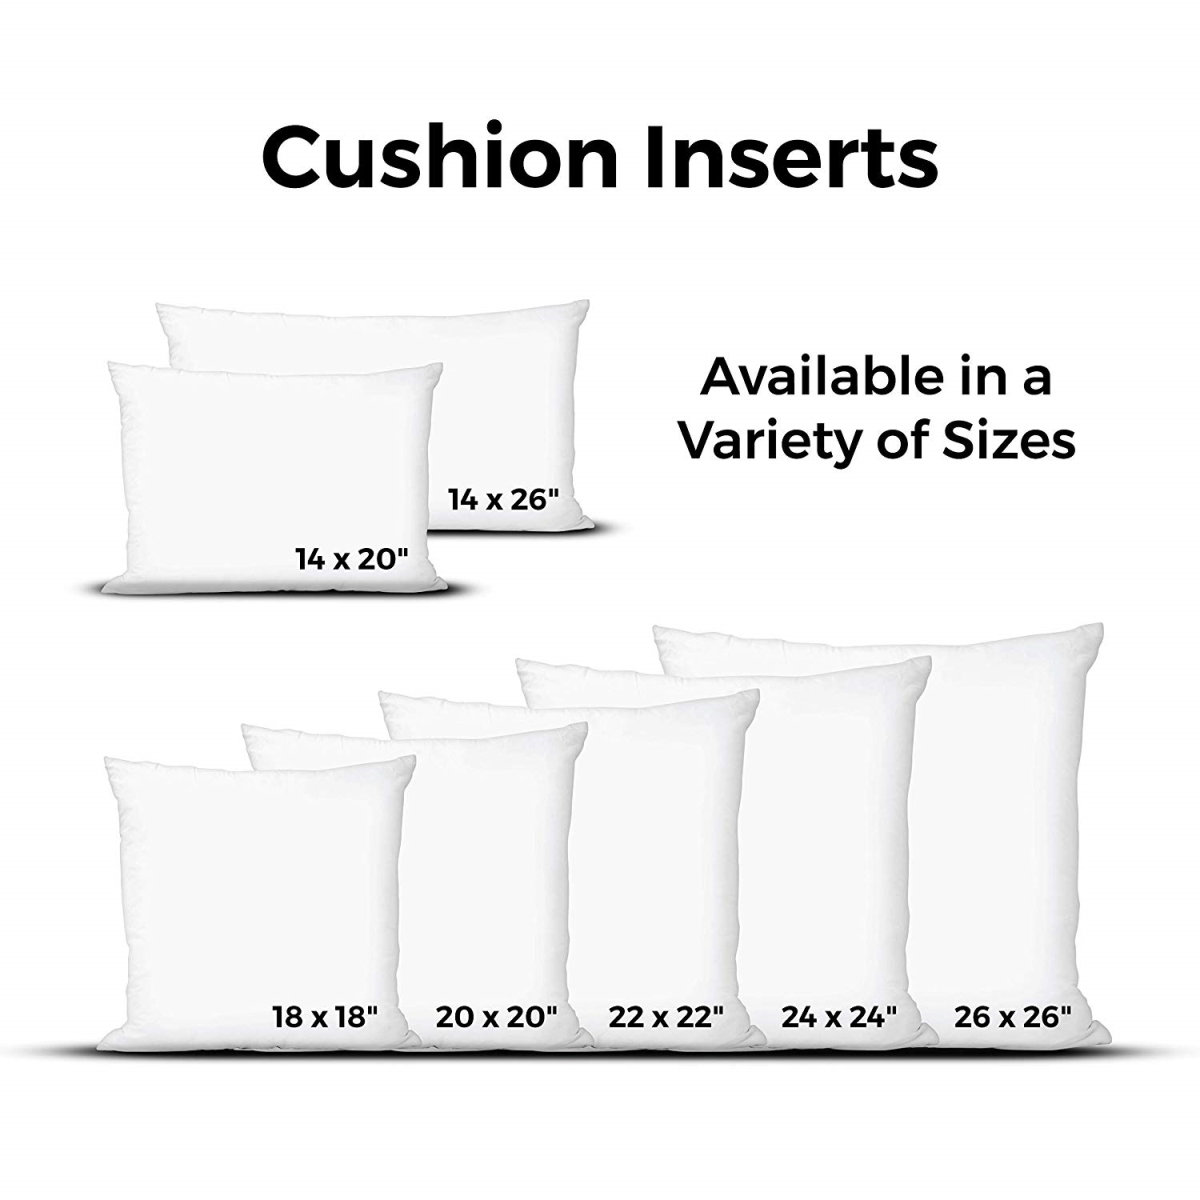 601426 14 X 26 In. Feather Filled Cushion Insert, White